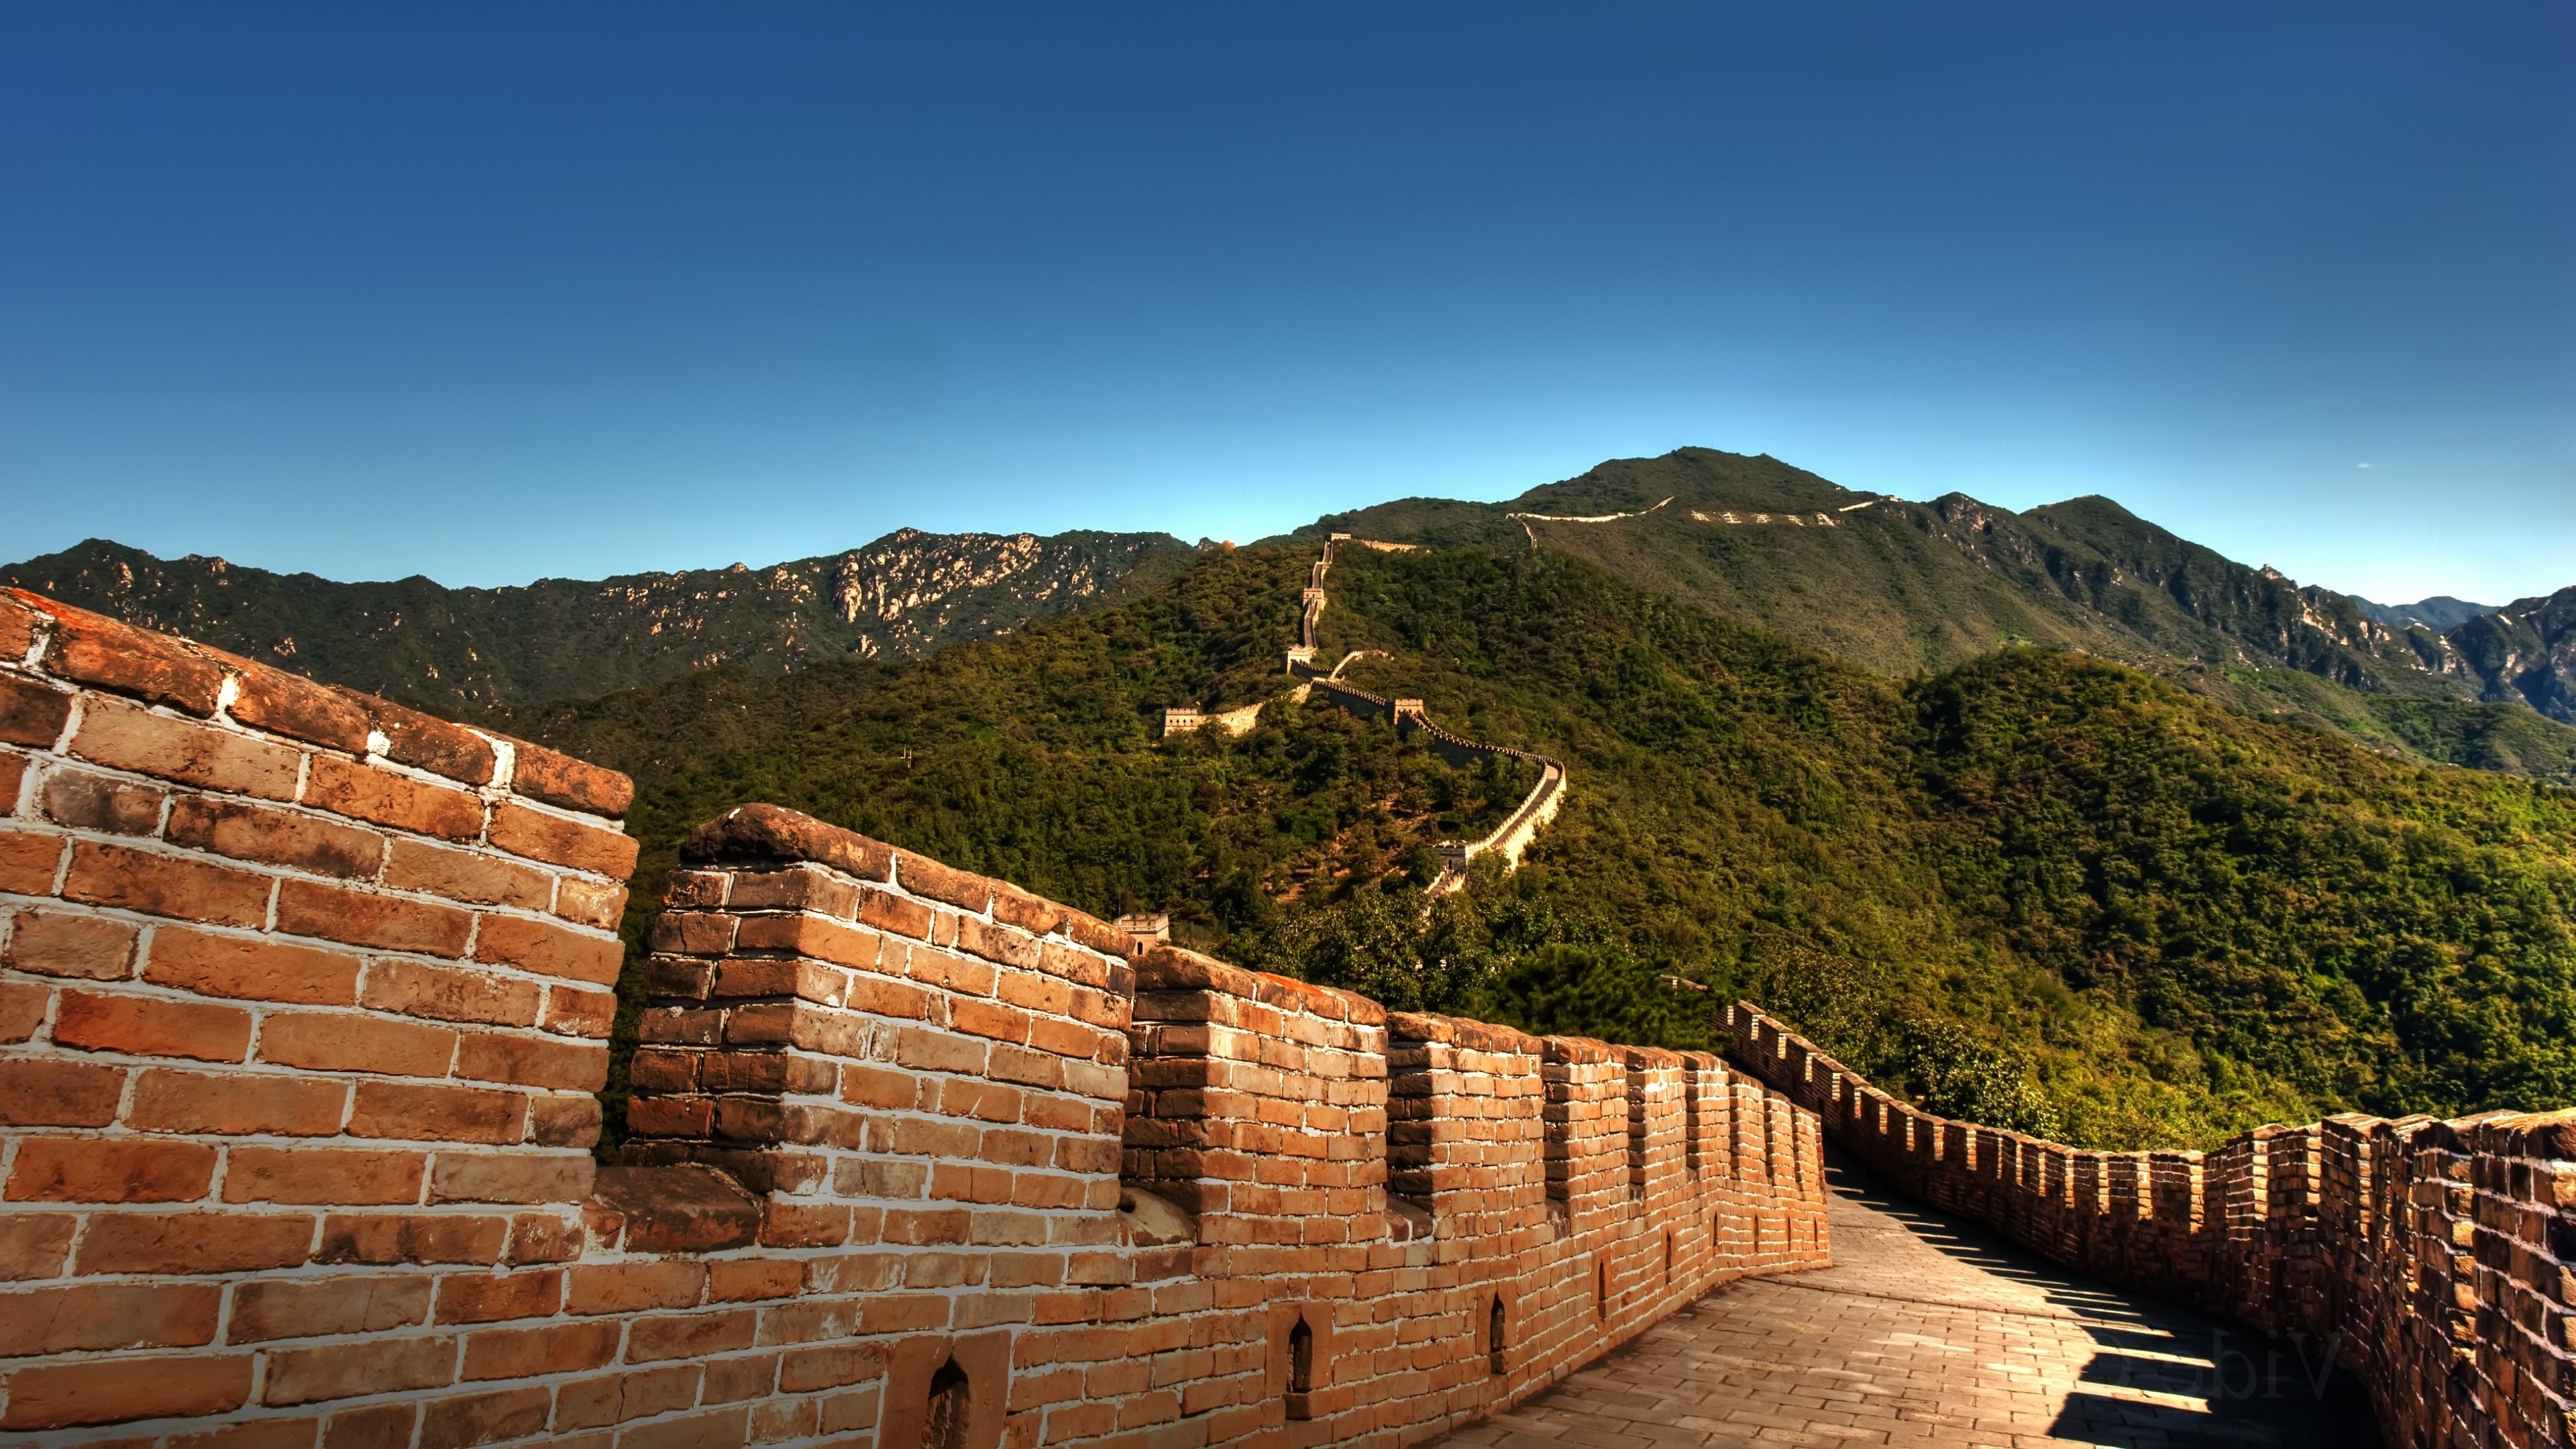 Great Wall of China: Many successive dynasties built and maintained multiple stretches of border fortification. 3840x2160 4K Wallpaper.